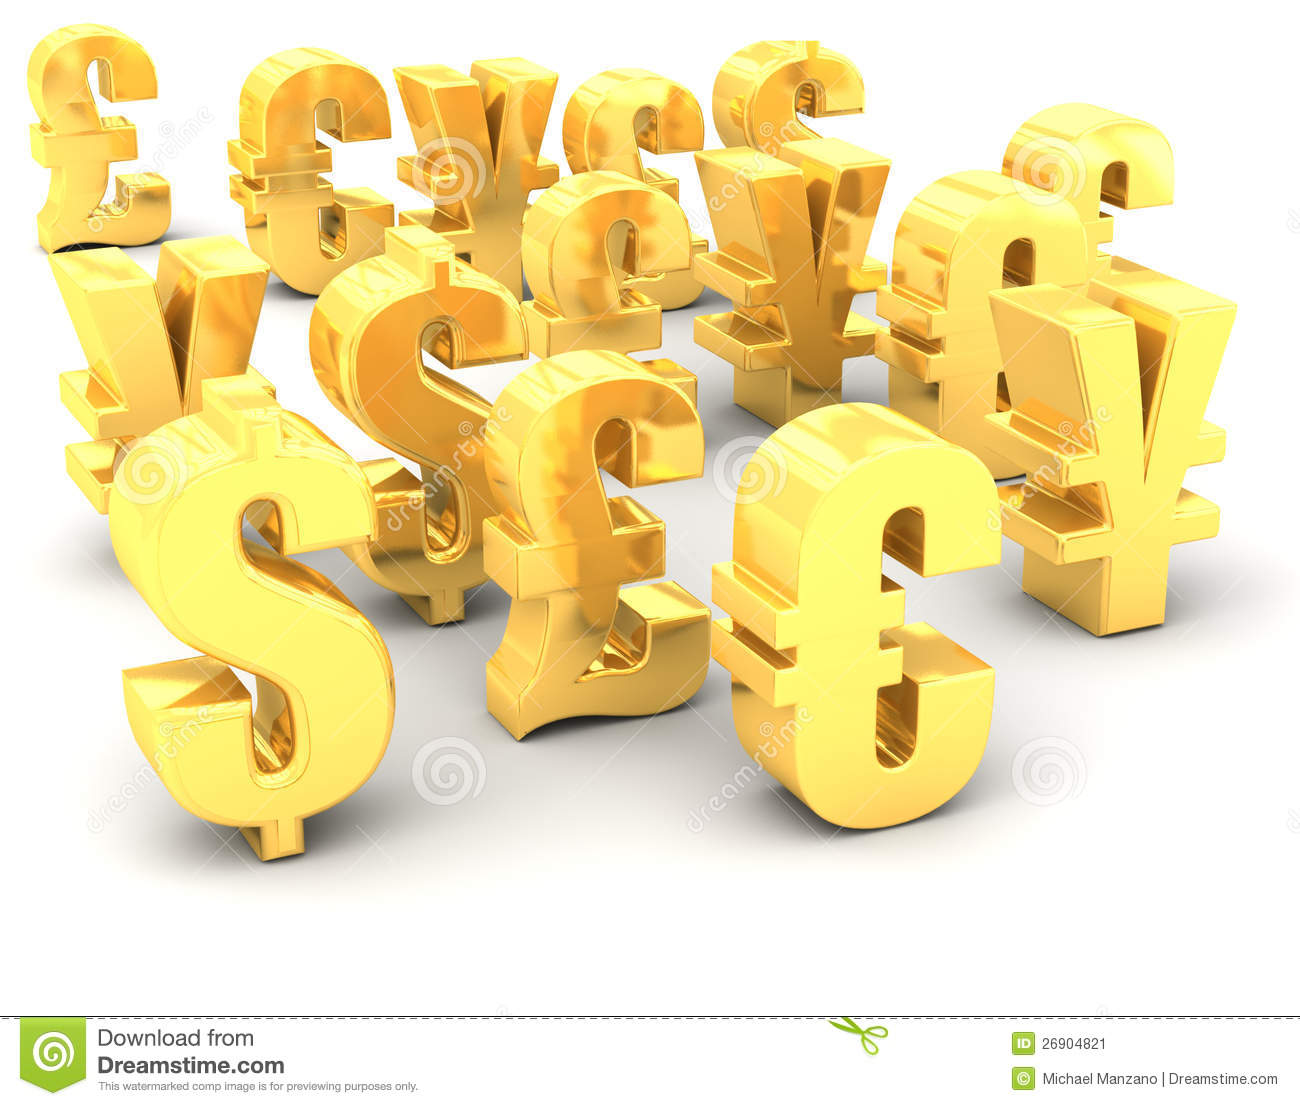 An Illustration Of 3d Gold Lettering Of National Symbols Of Different